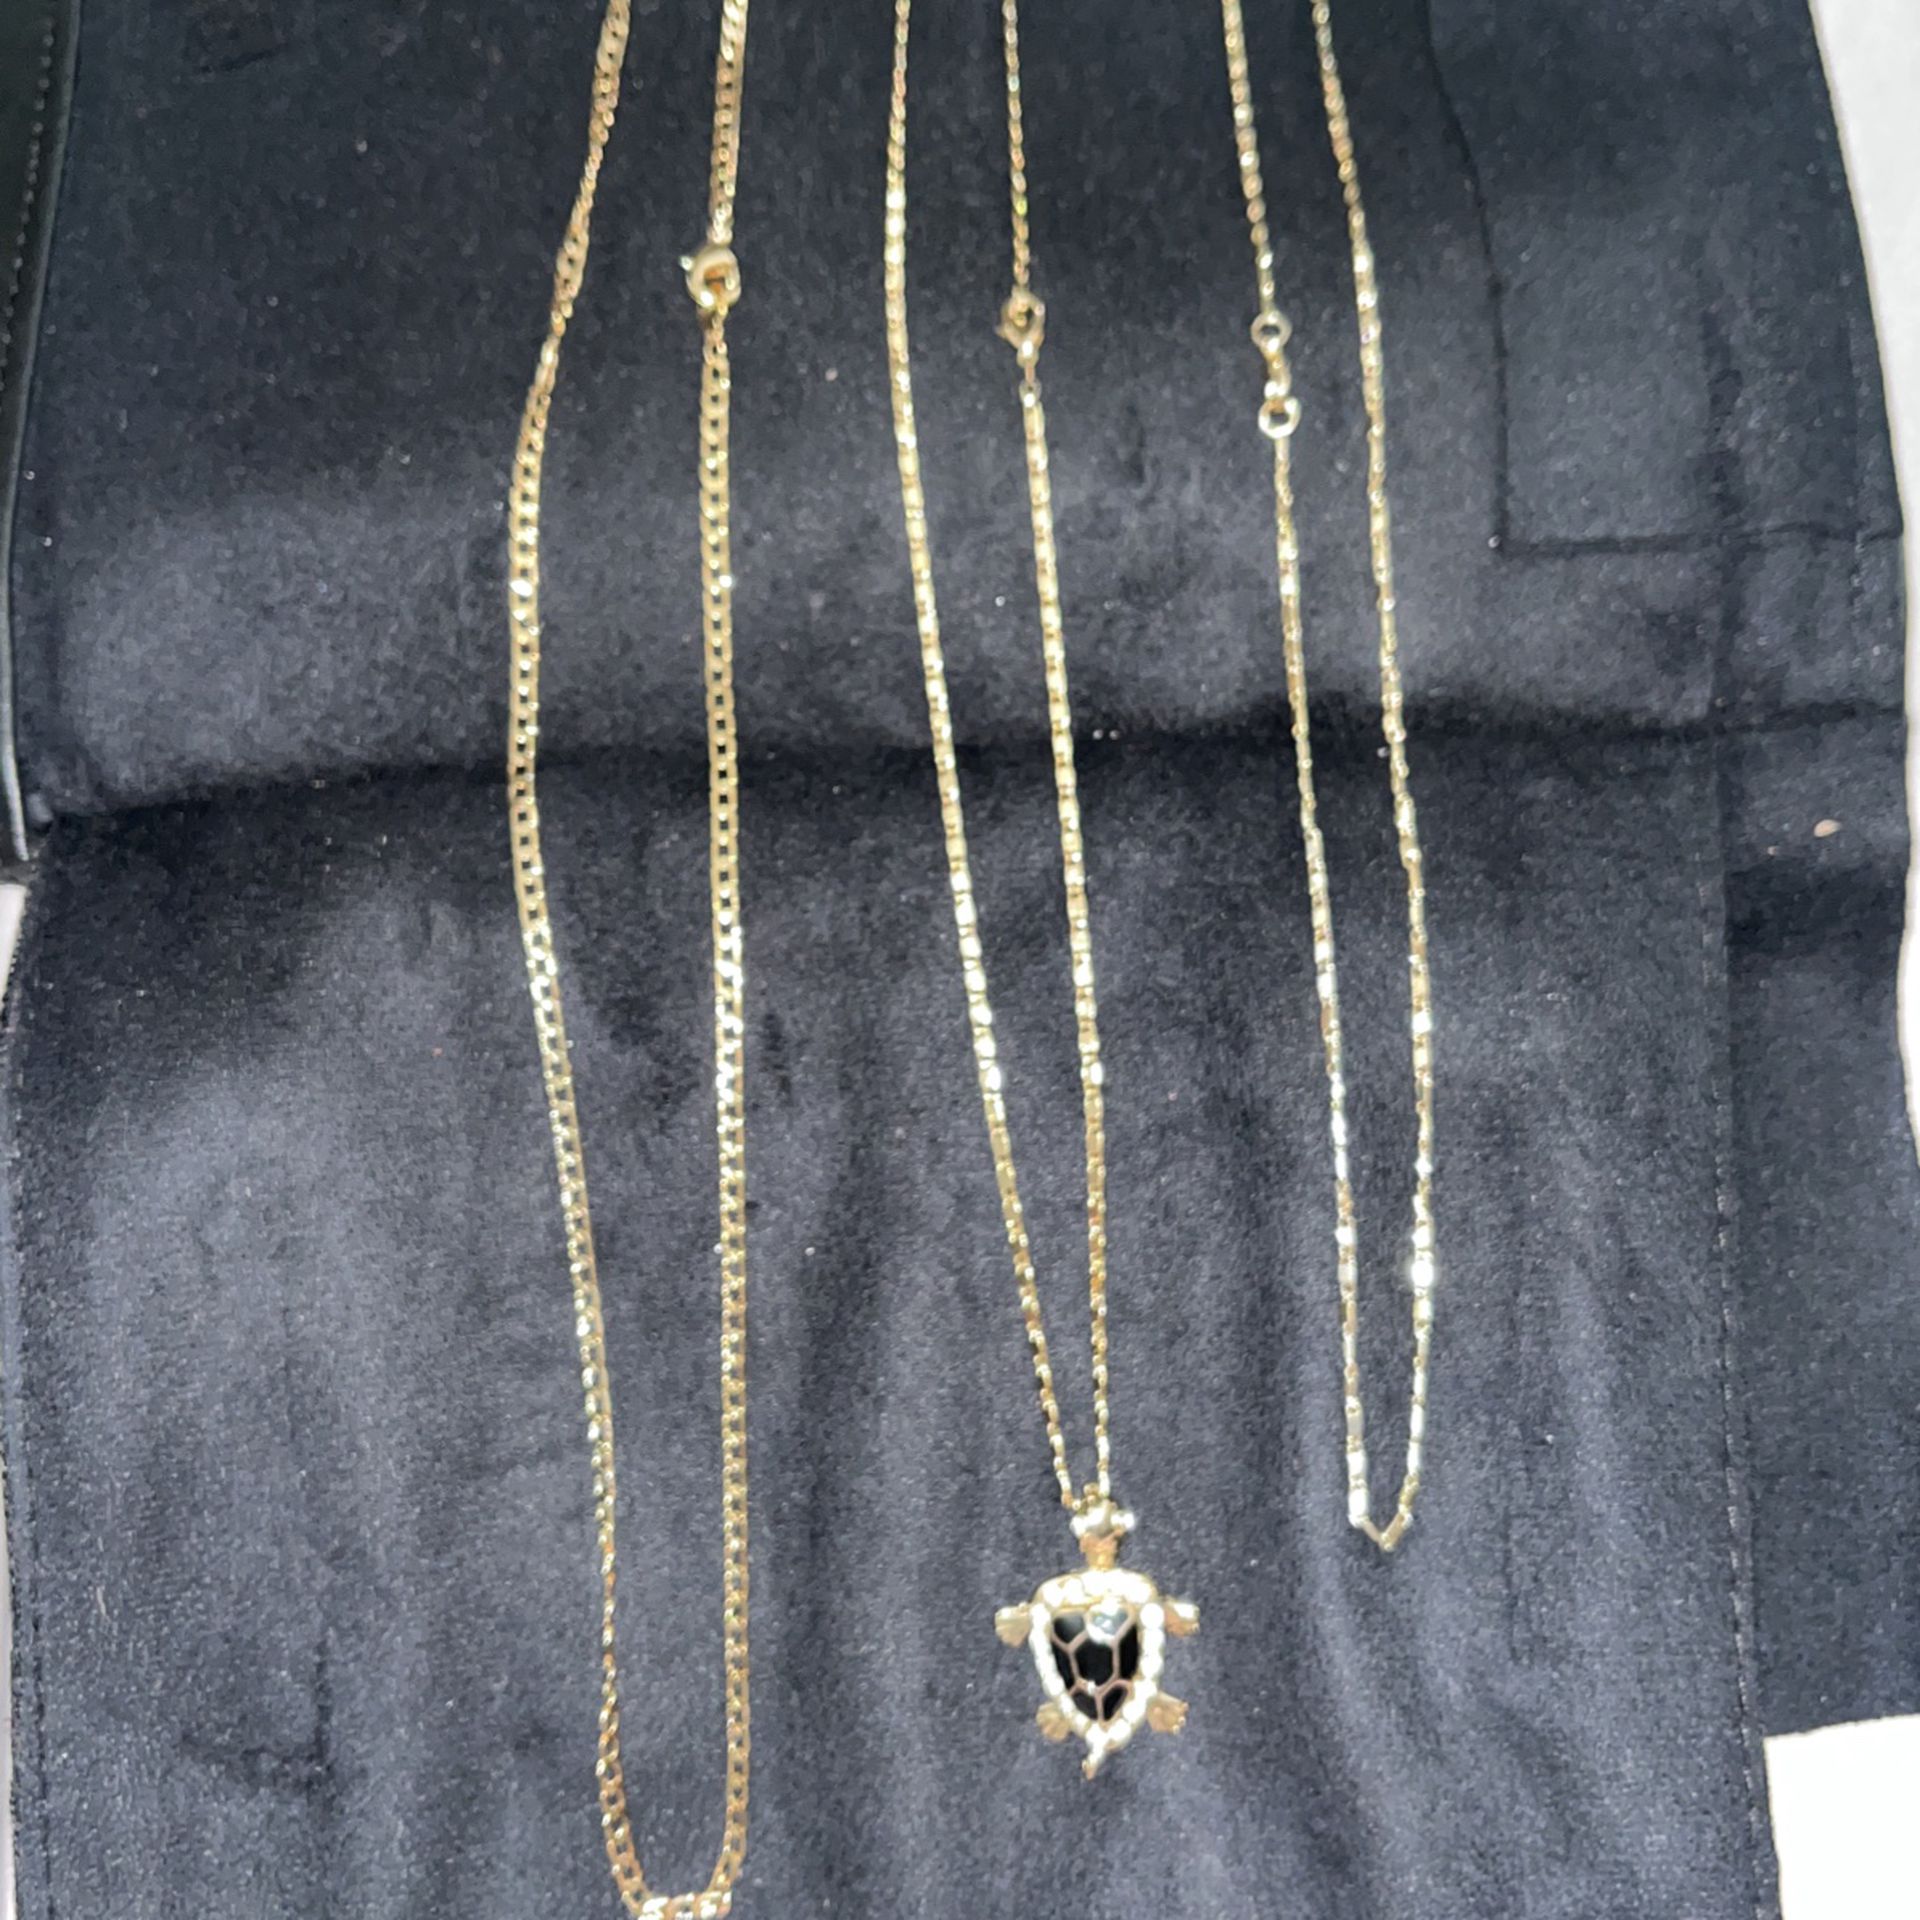 Gold laminated chains